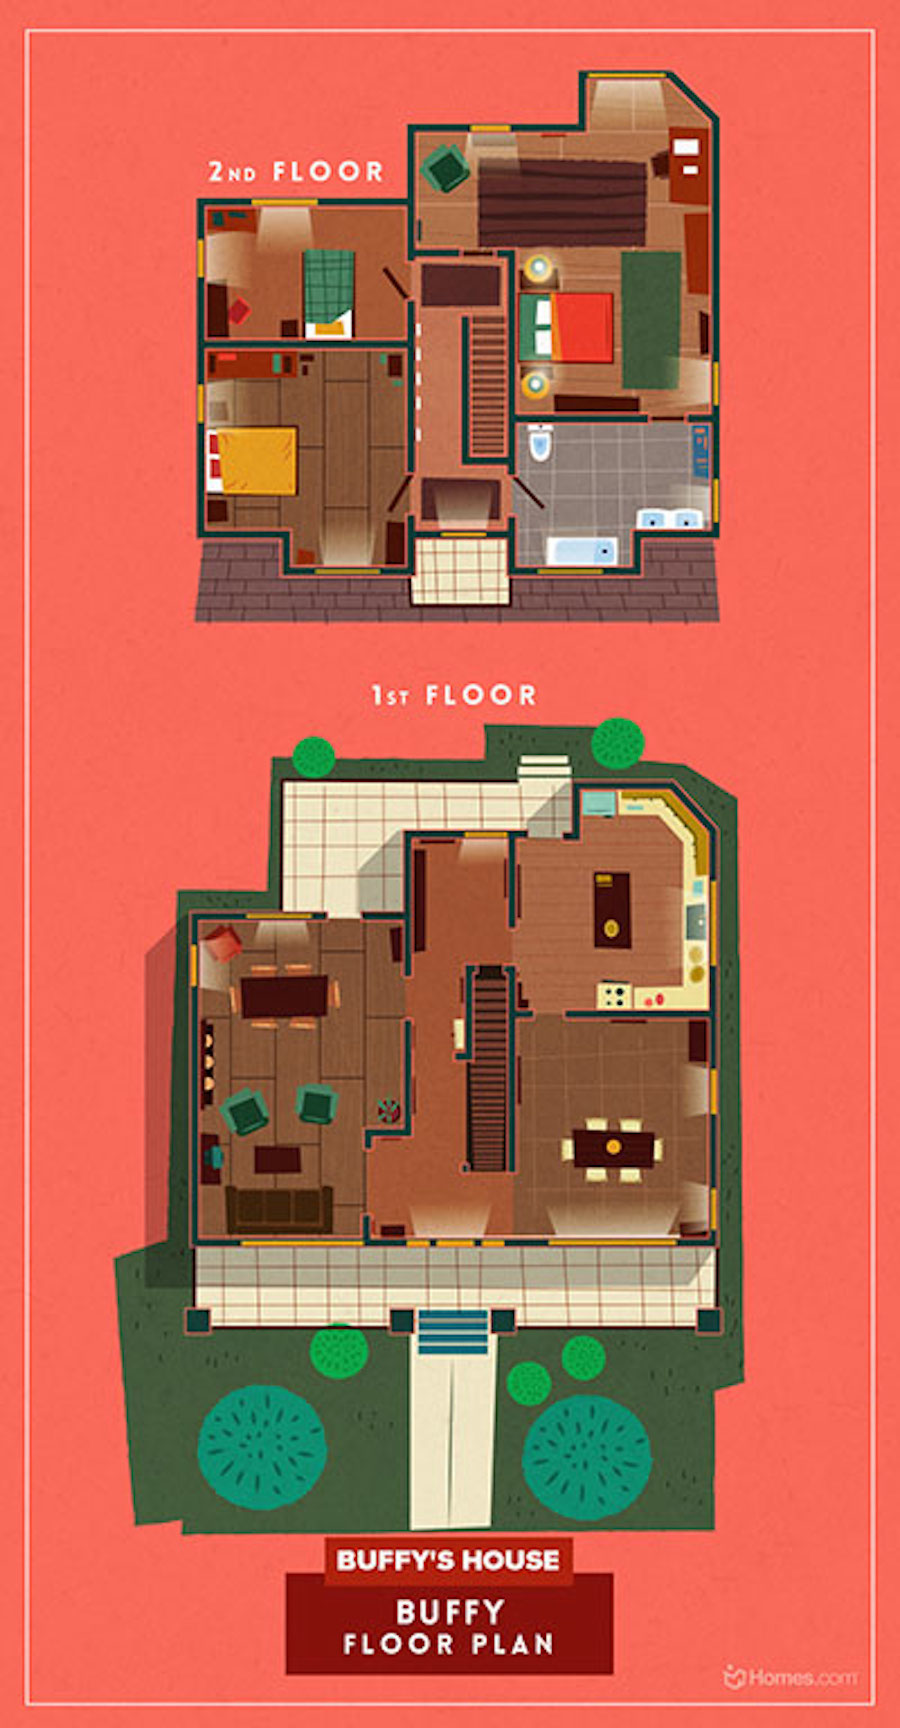 Home Floor Plans of Famous TV Shows-3